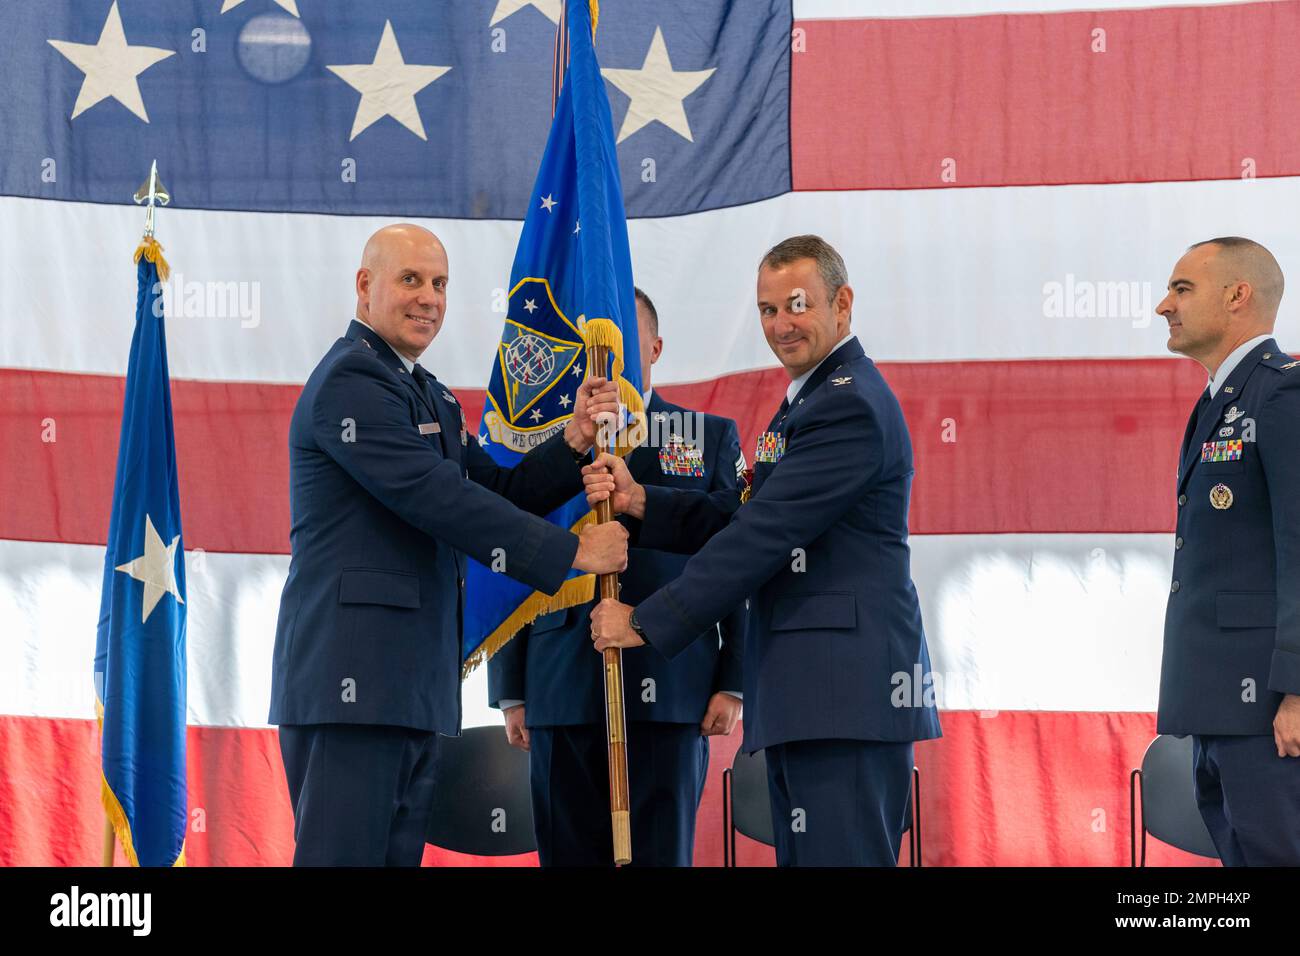 U.S. Air Force Brig. Gen. Gary McCue, Deputy Assistant Adjutant General for Air, Ohio National Guard, receives the official 180th Fighter Wing flag, officially relinquishes command of the wing from Col. Michael DiDio during a Change of Command ceremony at the 180FW in Swanton, Ohio, Oct. 15, 2022. During the ceremony, outgoing 180FW commander, DiDio, relinquished command to incoming commander, Col. Chad Holesko. Stock Photo